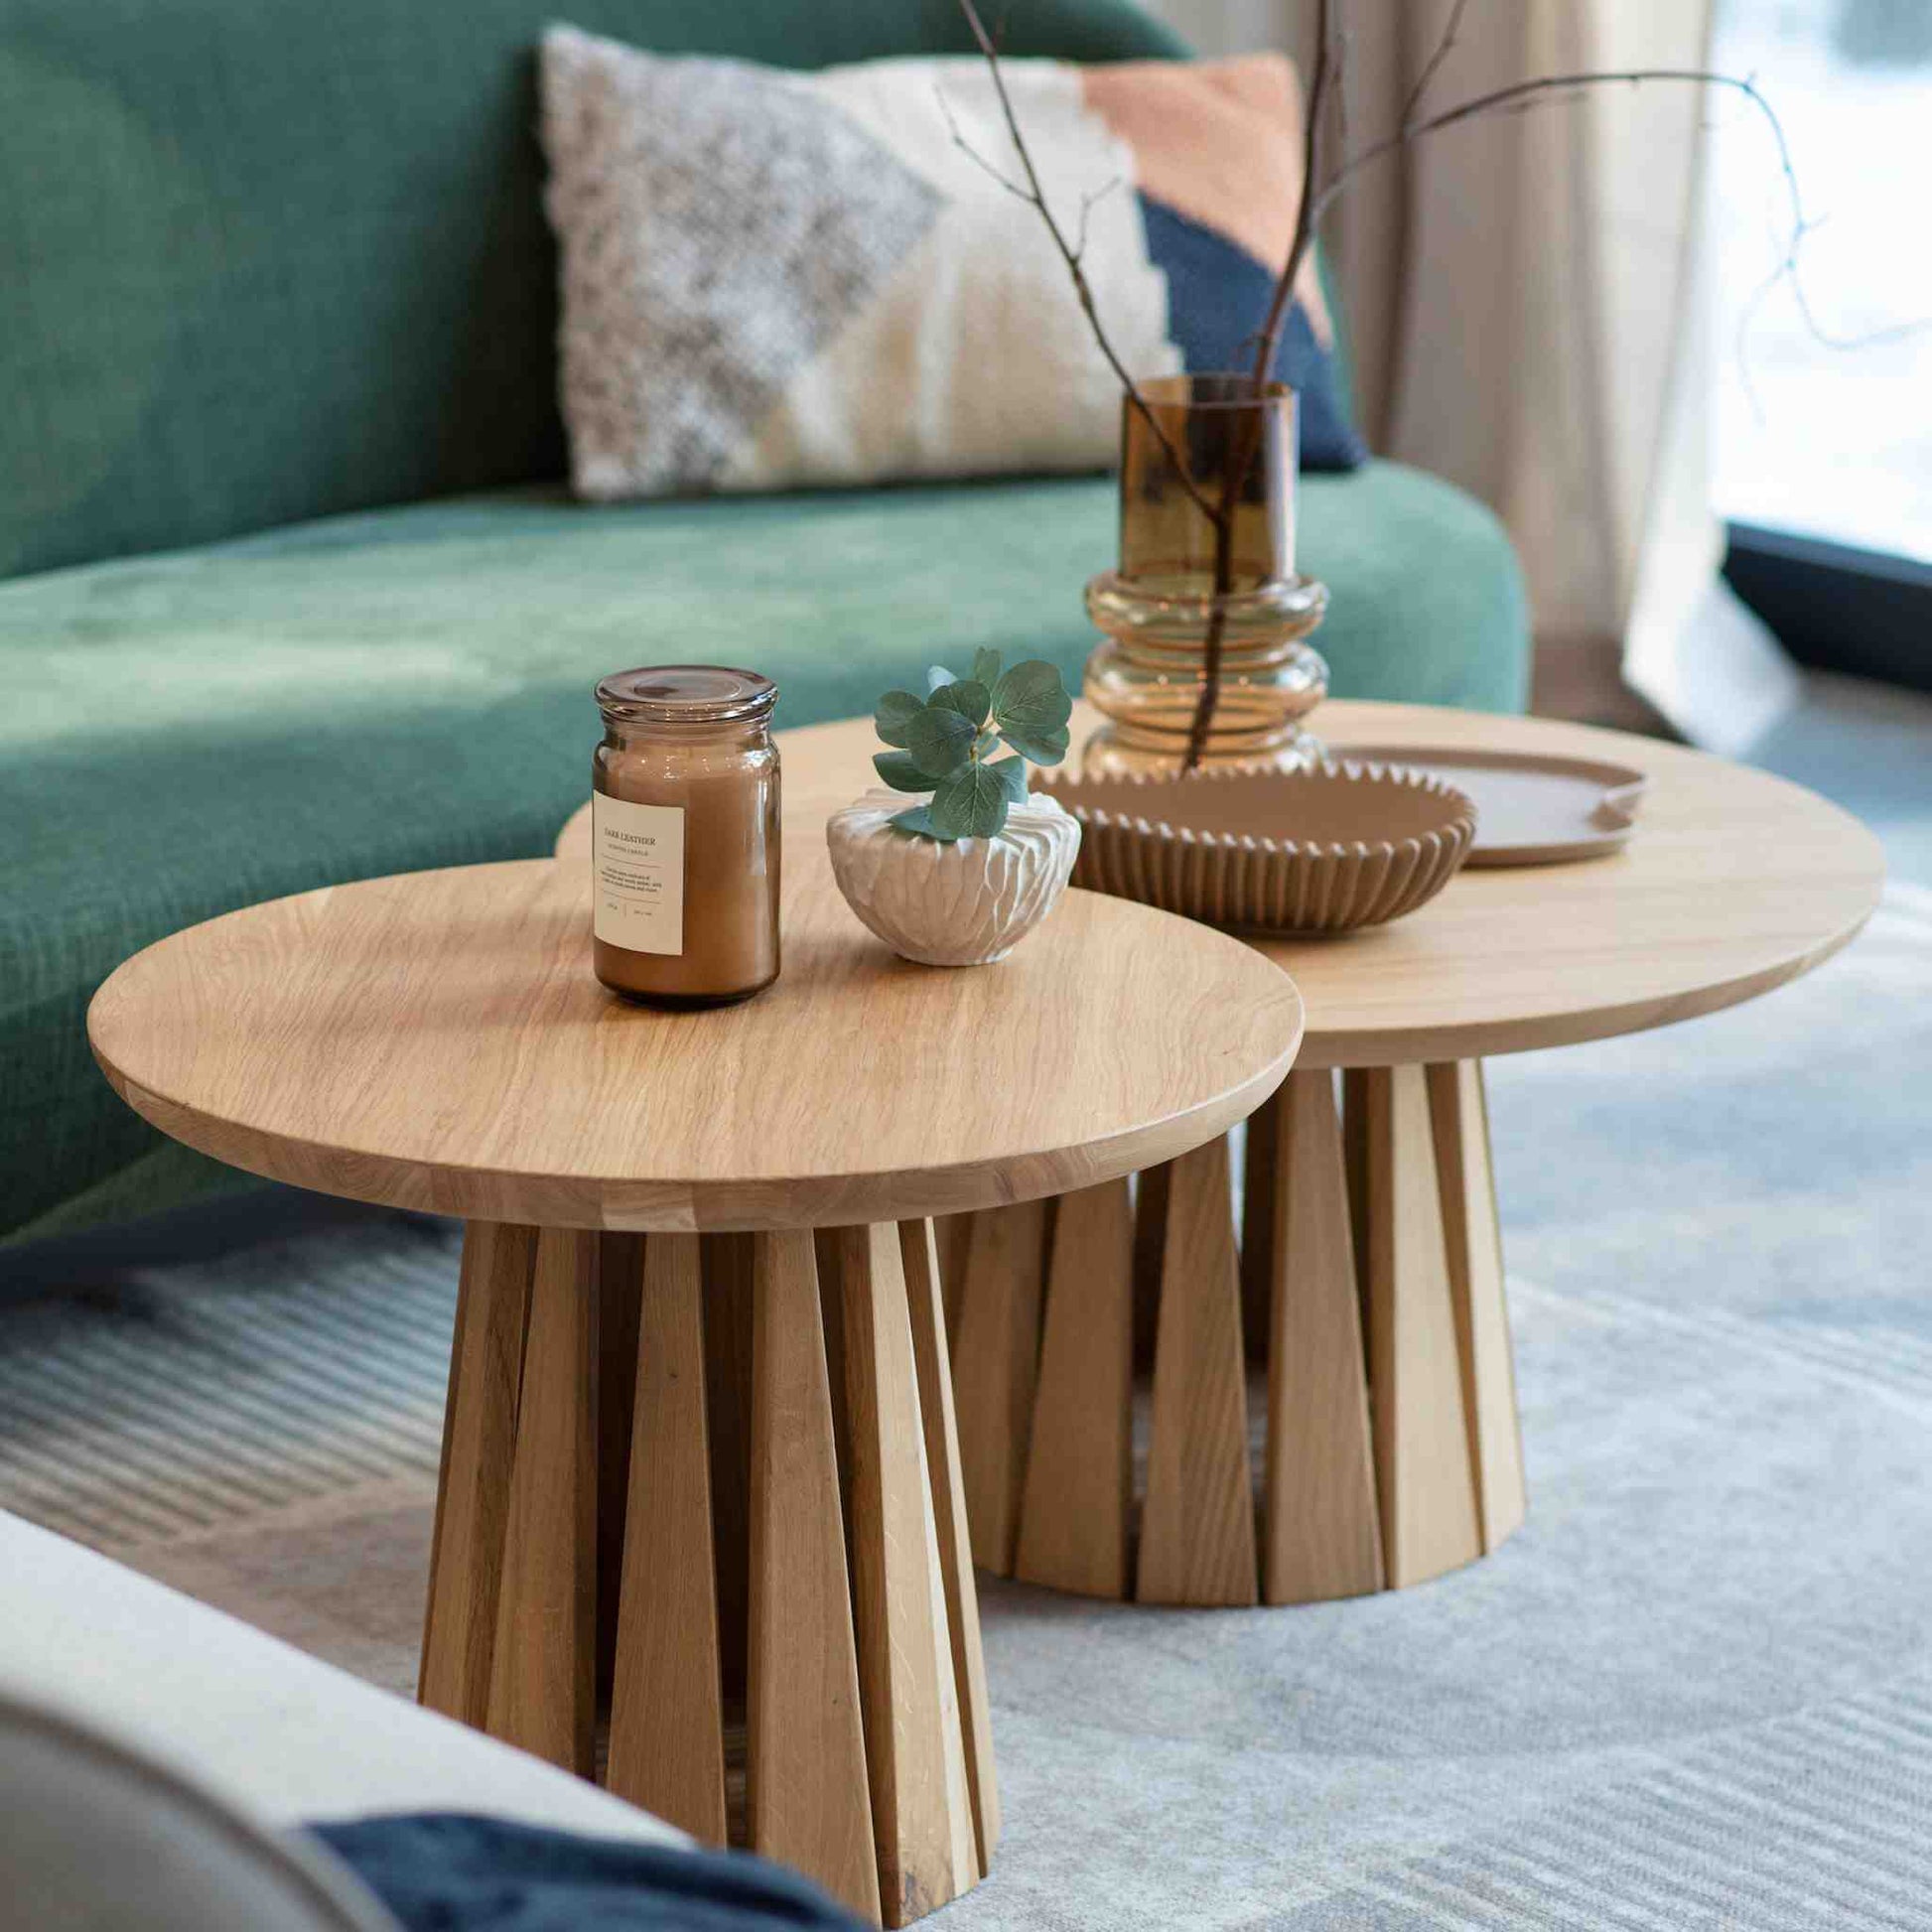 Interior arrangement with the ÉTAUDORÉ Rigi coffee tables made from solid oak wood